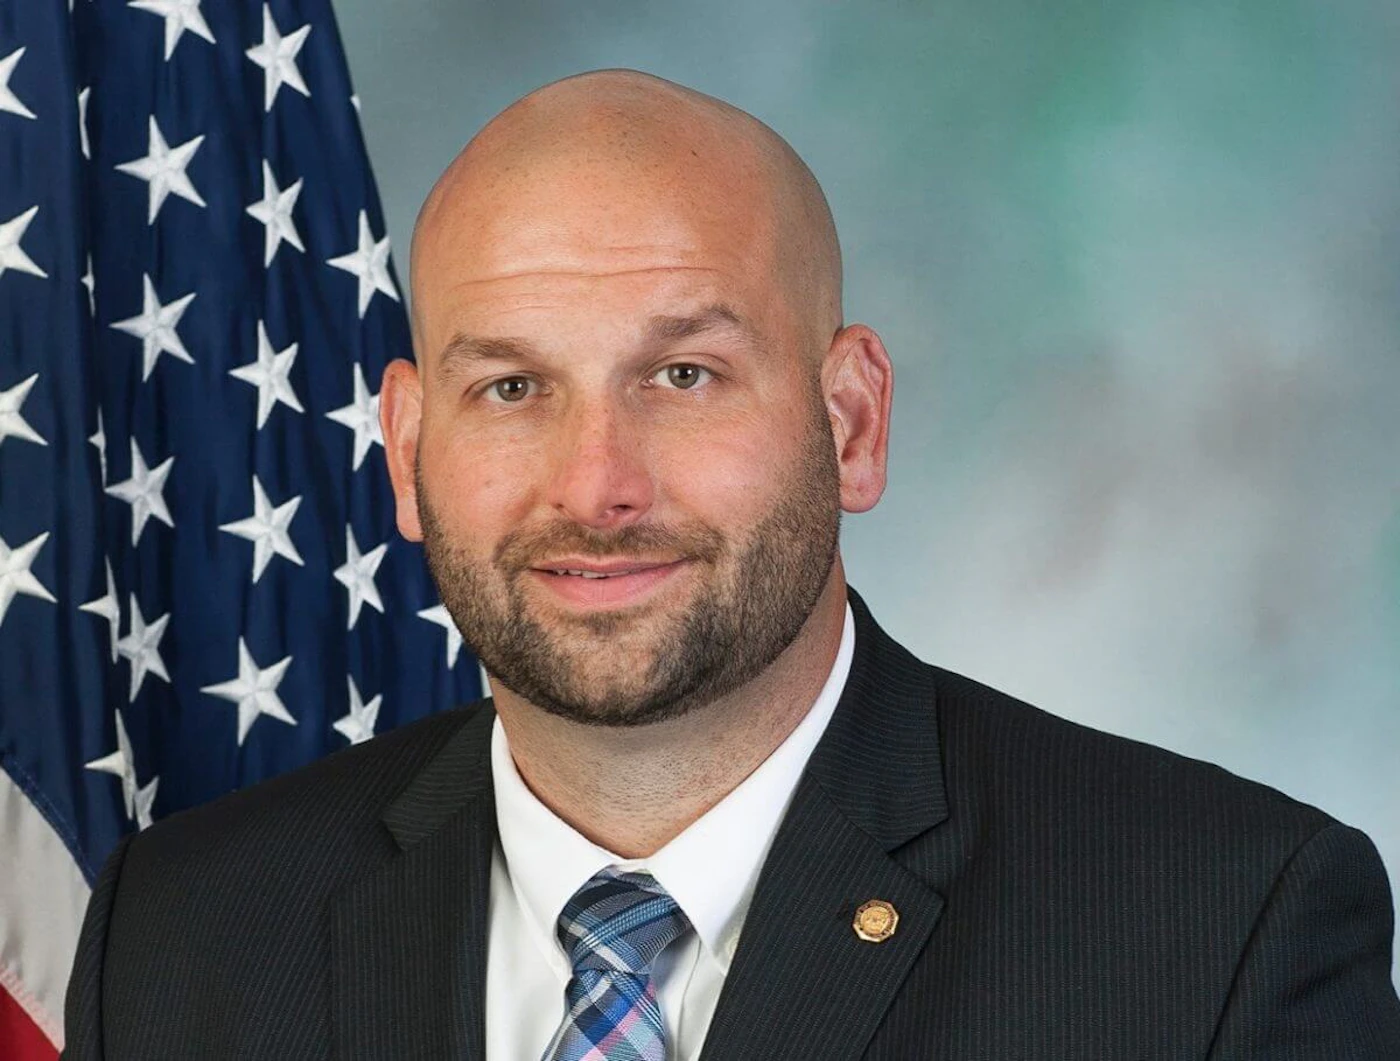 State Rep. Mike Reese. (Courtesy of Pennsylvania House of Representatives)